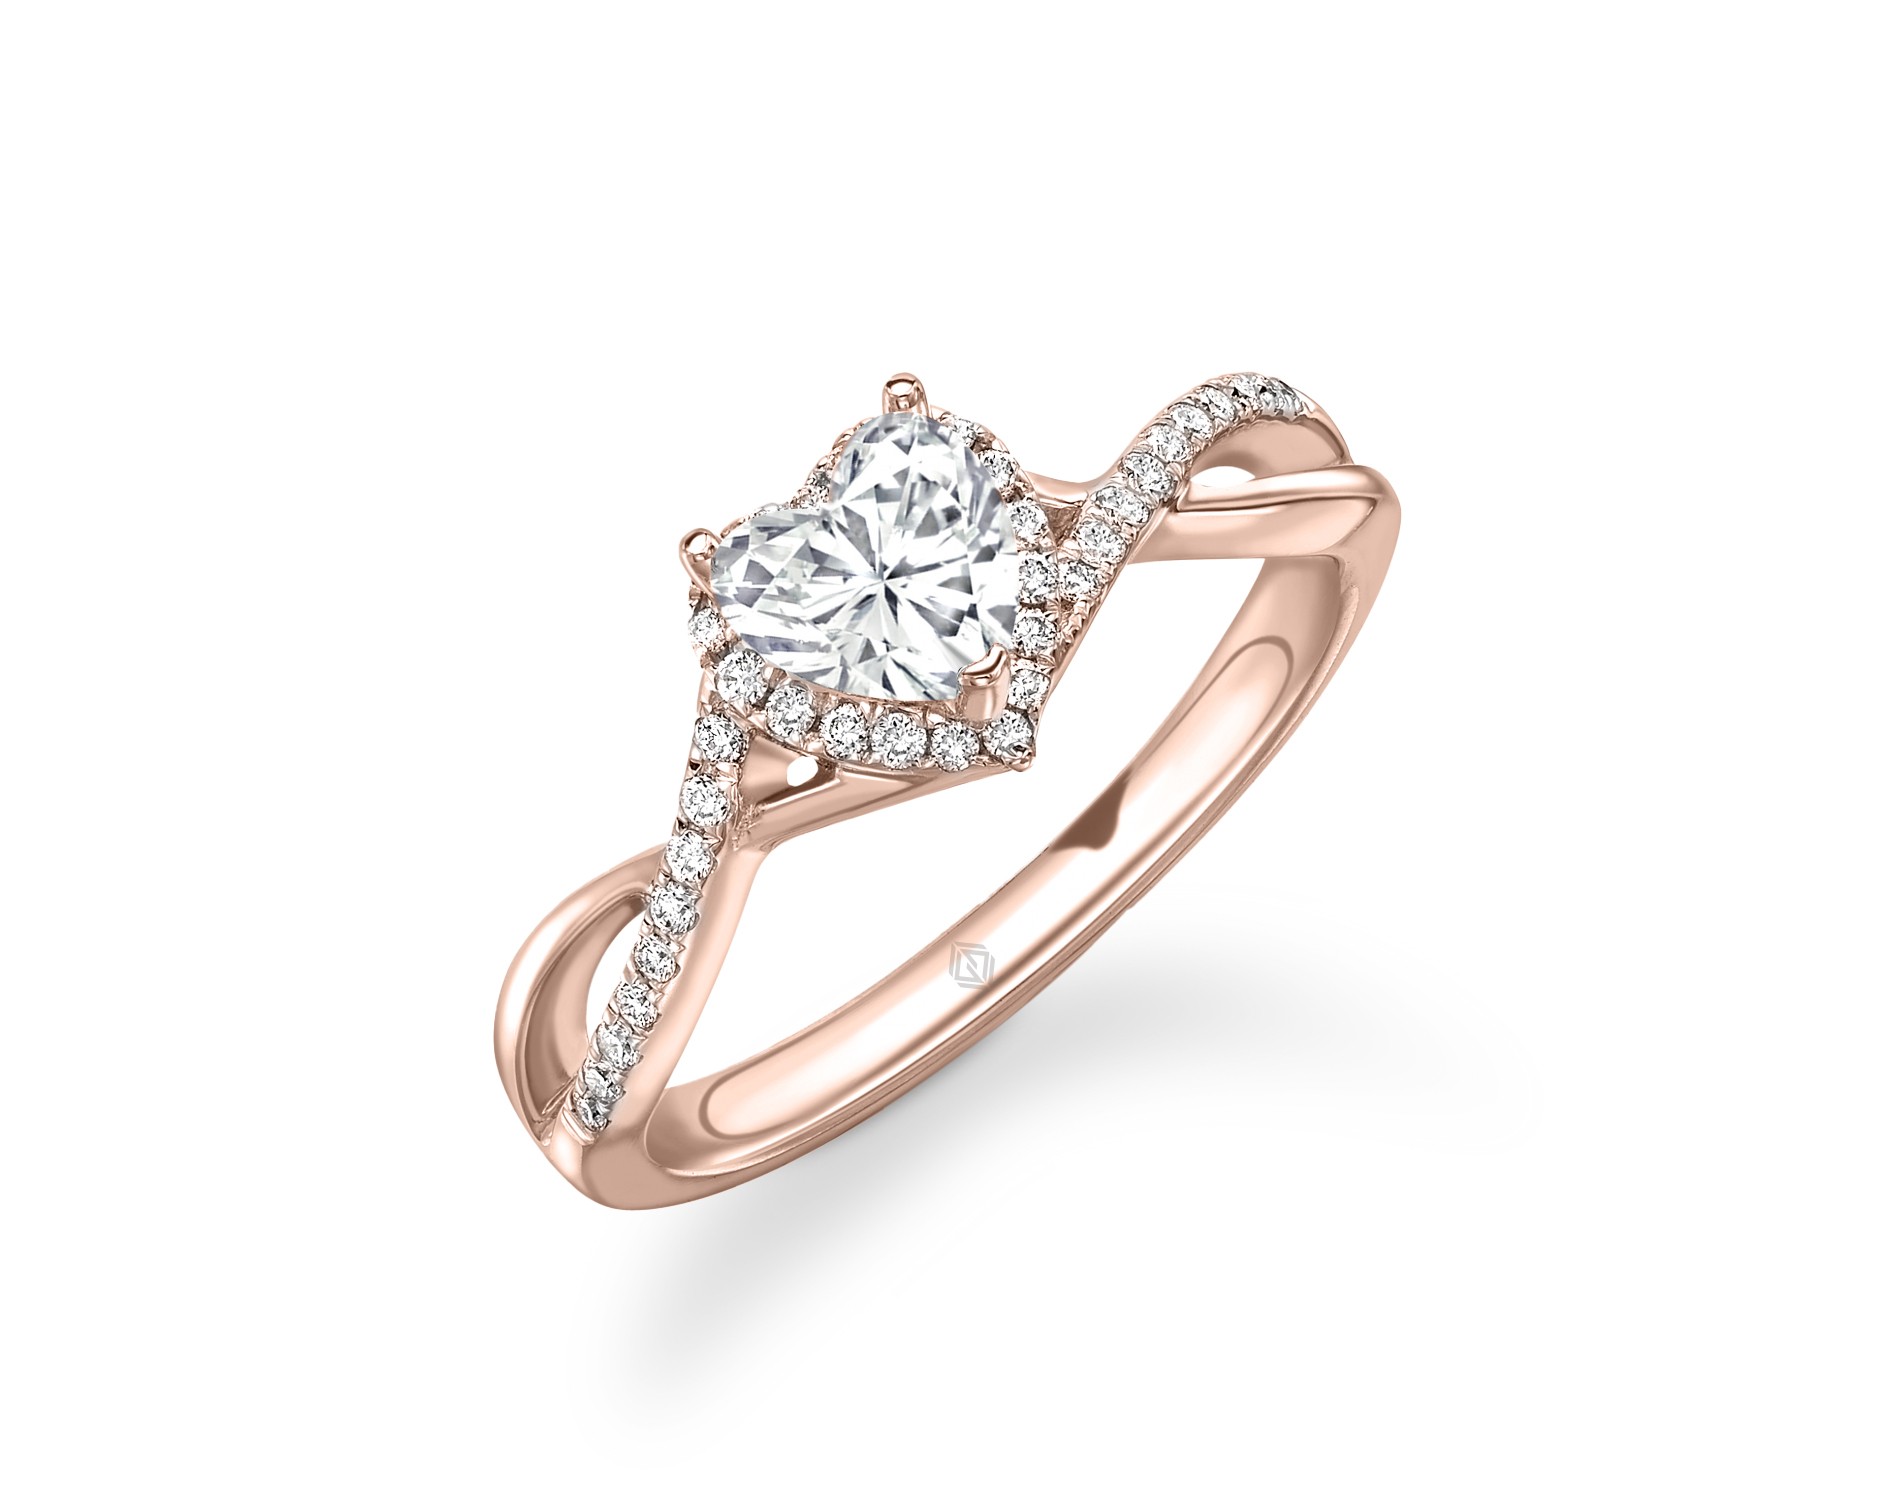 18K ROSE GOLD HEART CUT HALO DIAMOND ENGAGEMENT RING WITH SIDE STONES IN TWISTED SHANK PAVE SET